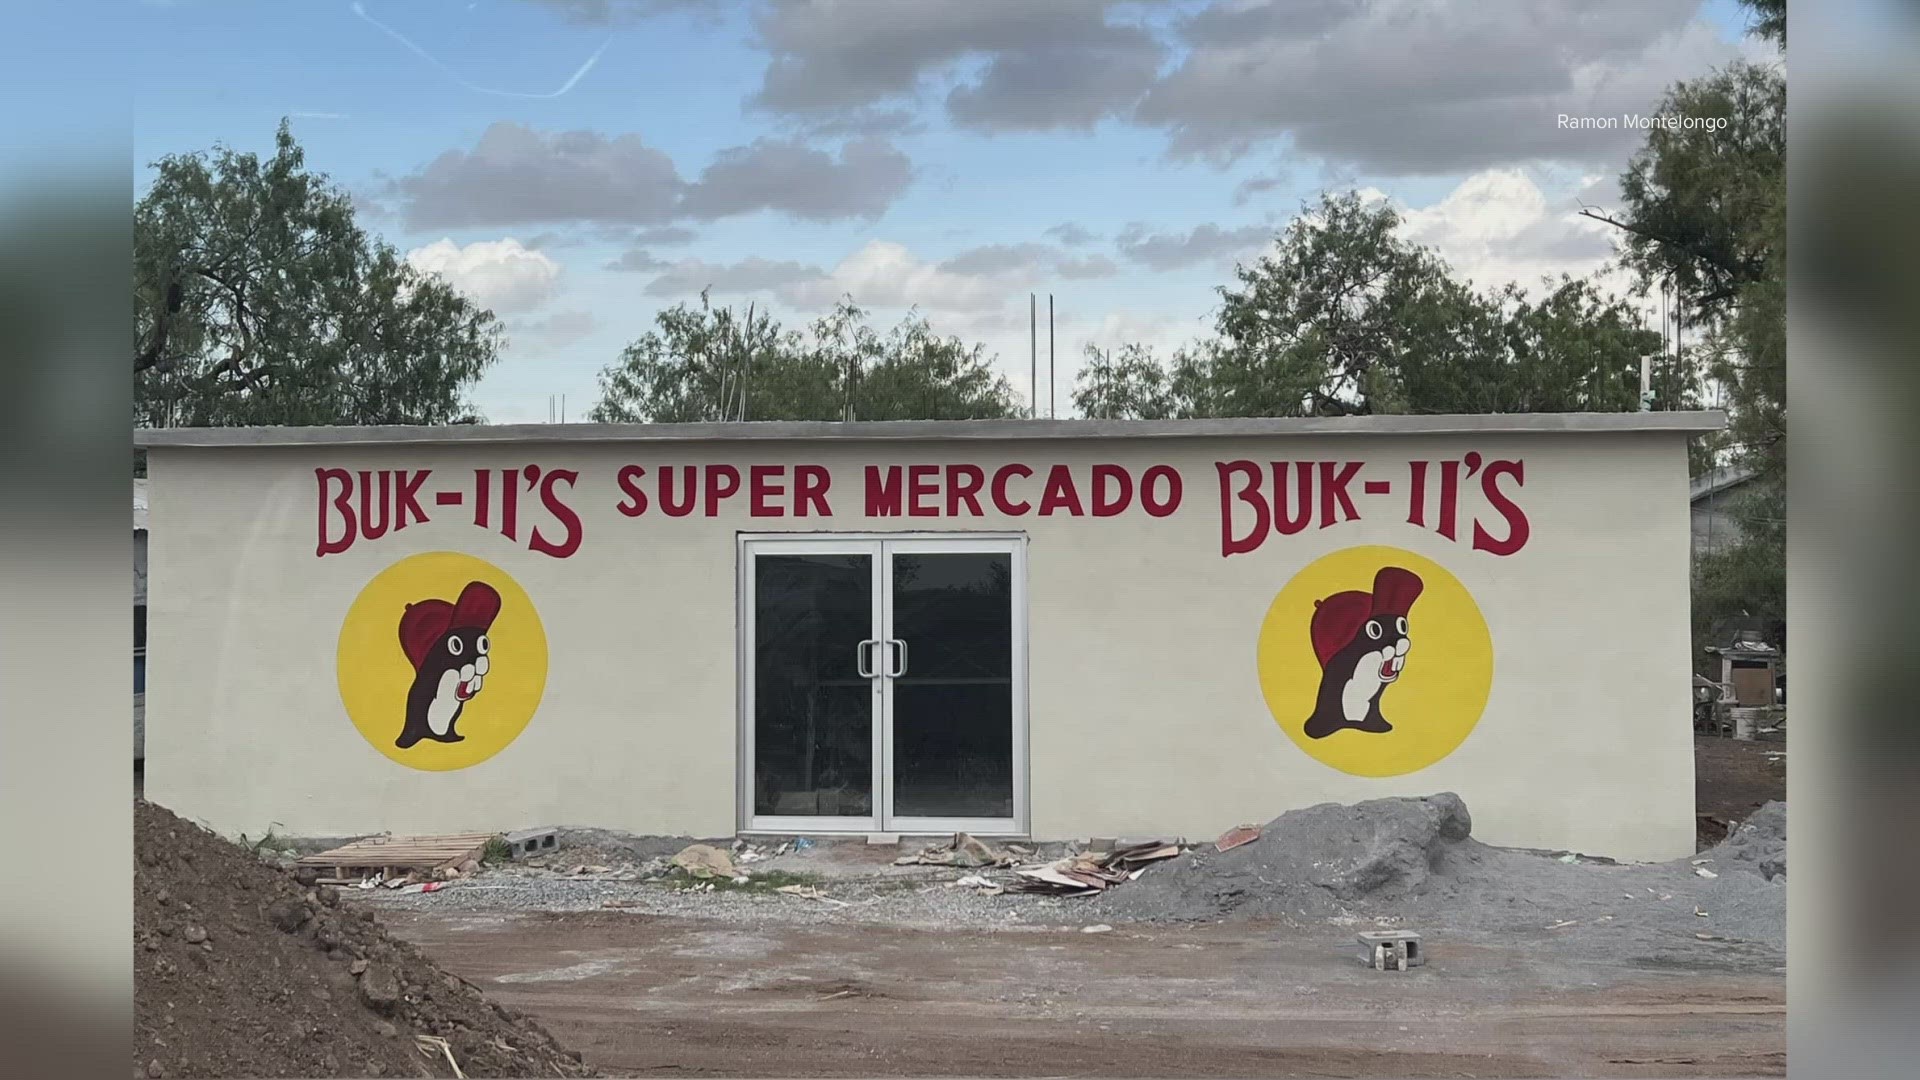 "Buc-ee’s will not stand as an idle spectator while others use without permission the intellectual property that Buc-ee’s has cultivated for decades," a rep said.